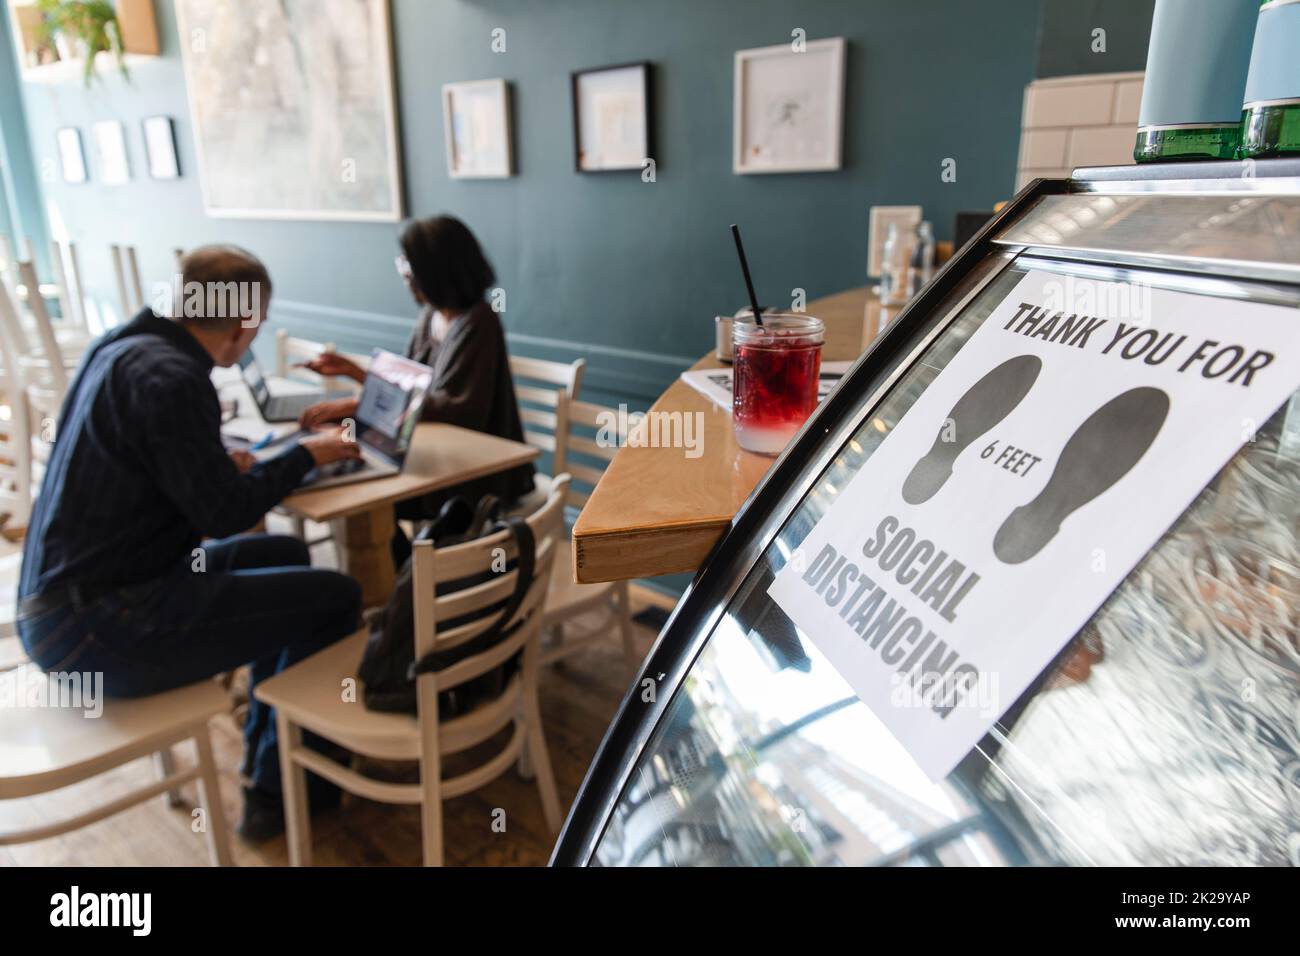 Social distancing sign on cafe counter Stock Photo